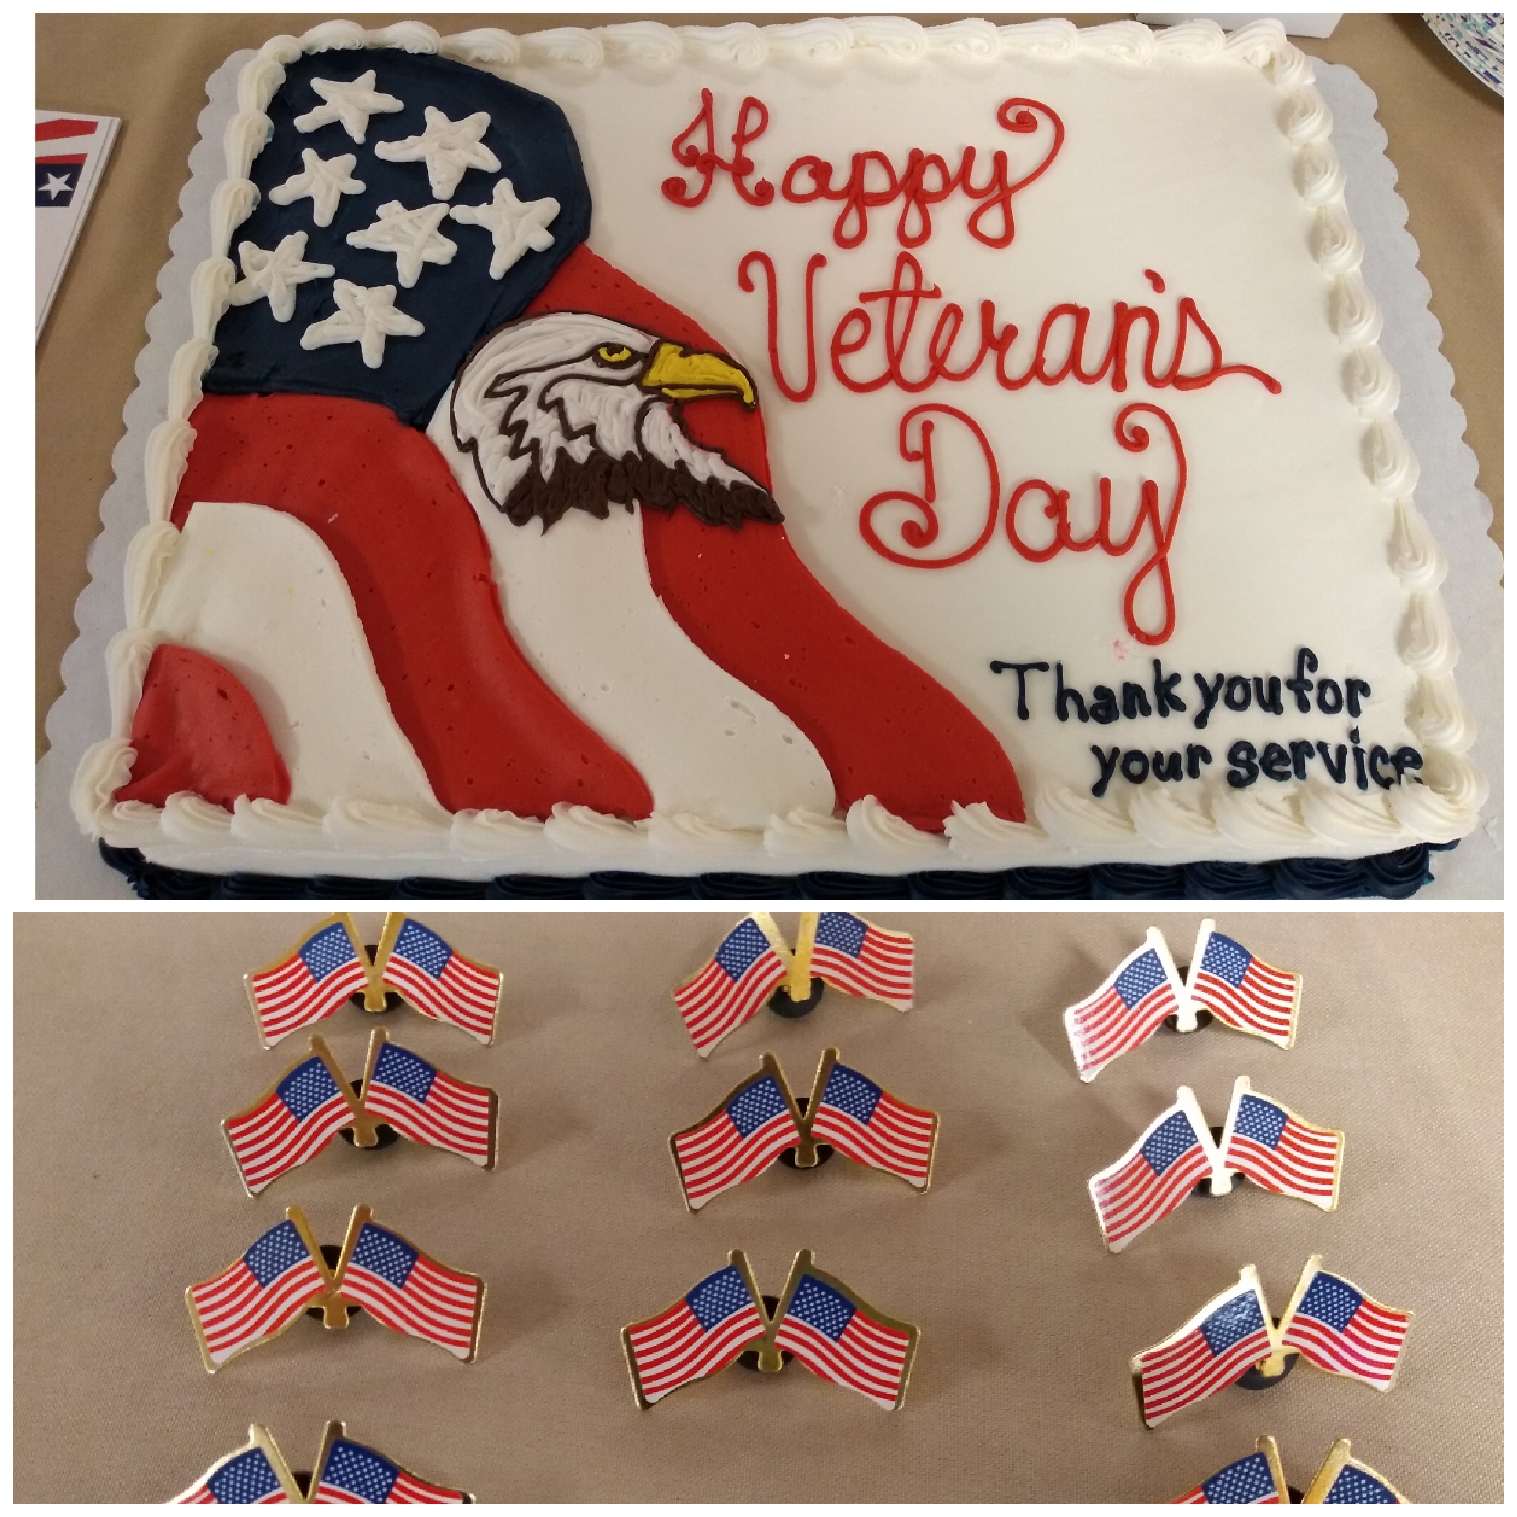 veterans day cake and pins